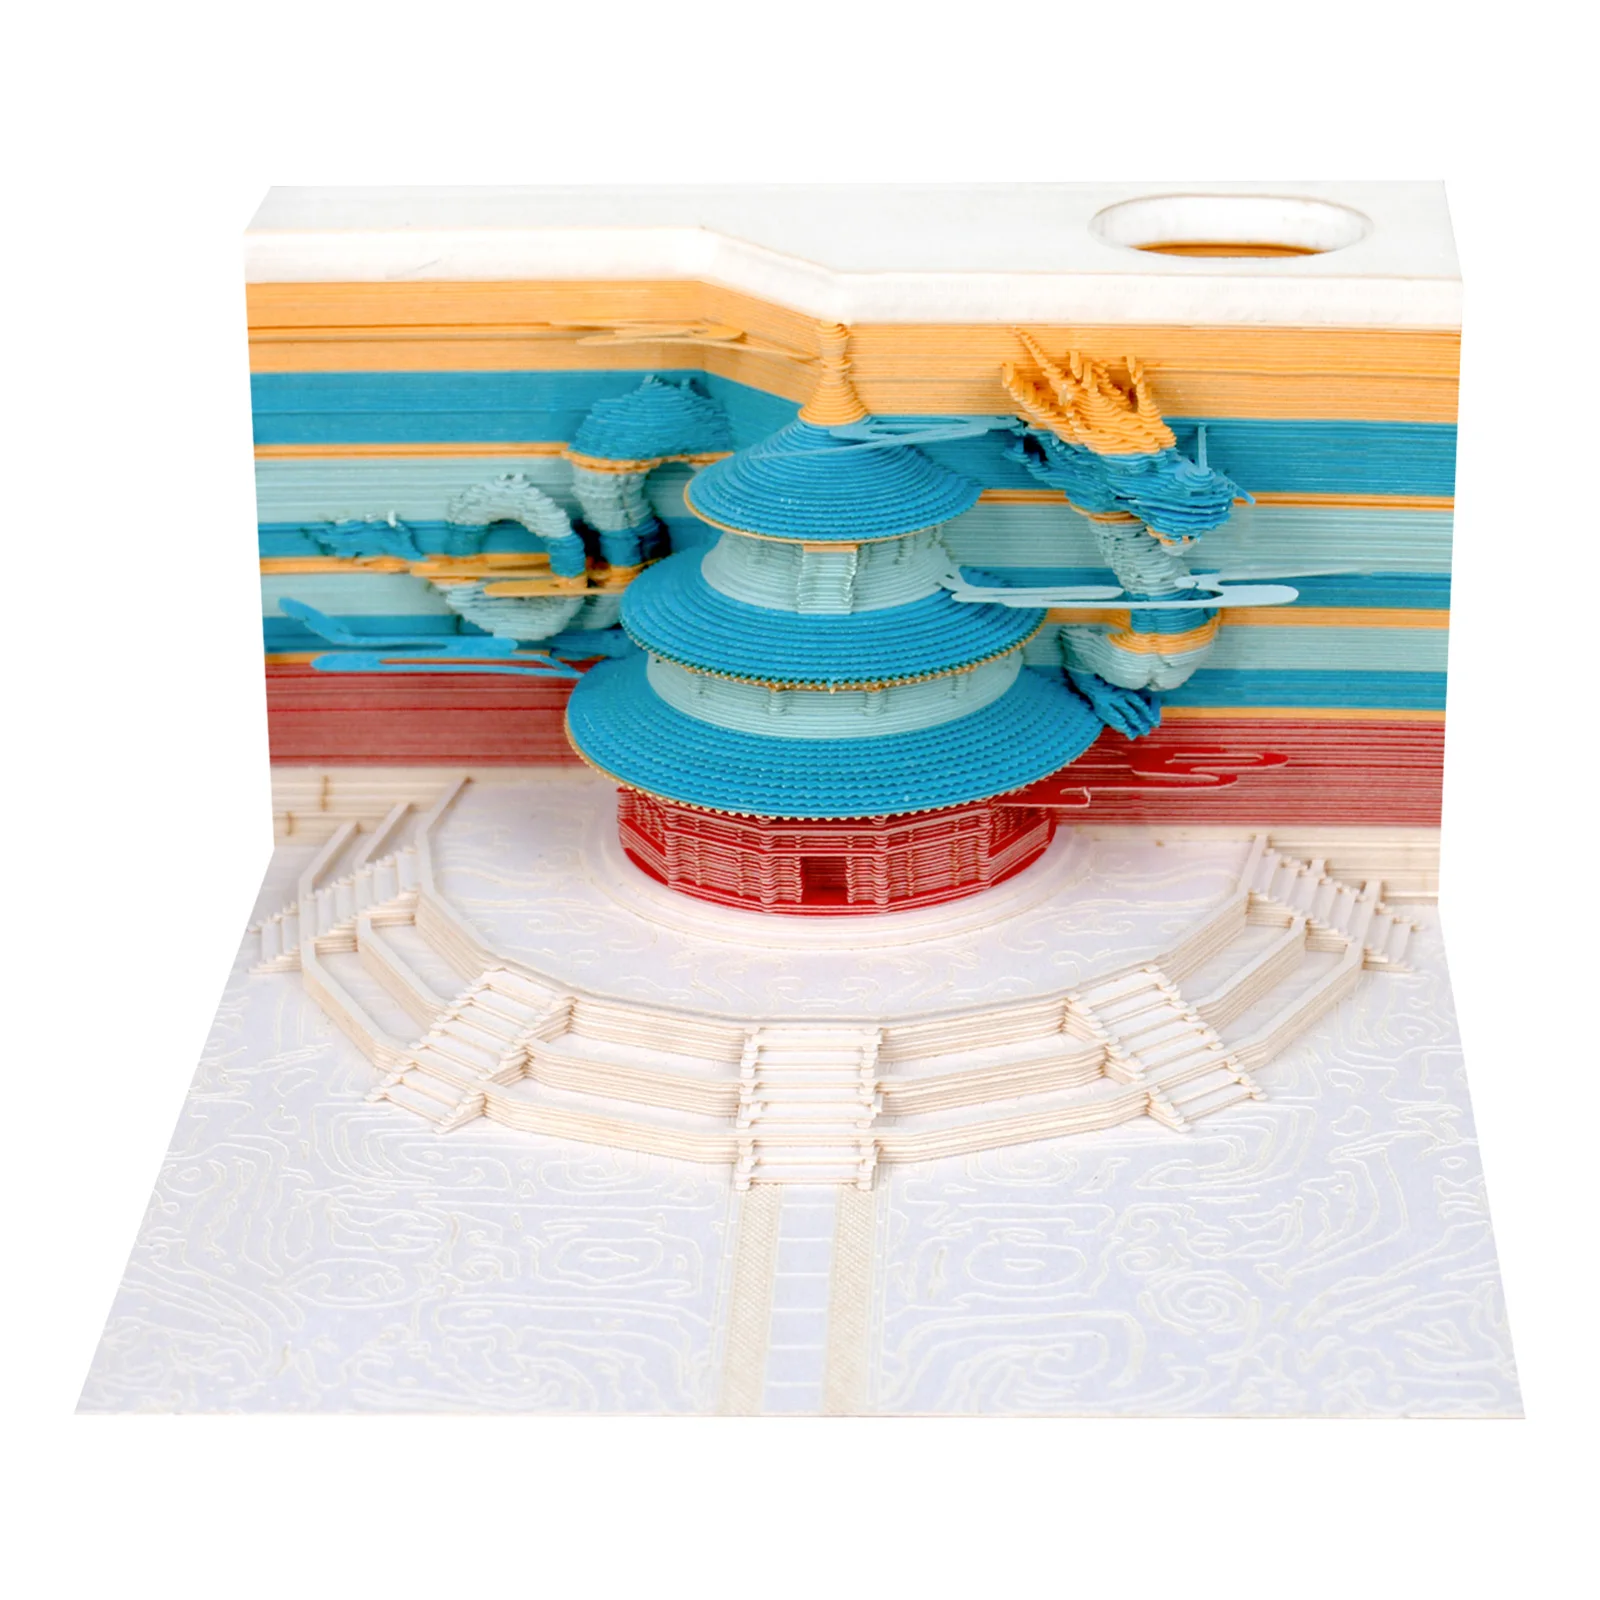 Omoshiroi Blocks 3D Memo Pad Temple Of Heaven Led Notepad Pen Holder Calendar Art Sticky Notes Office Stationery Holiday Gifts